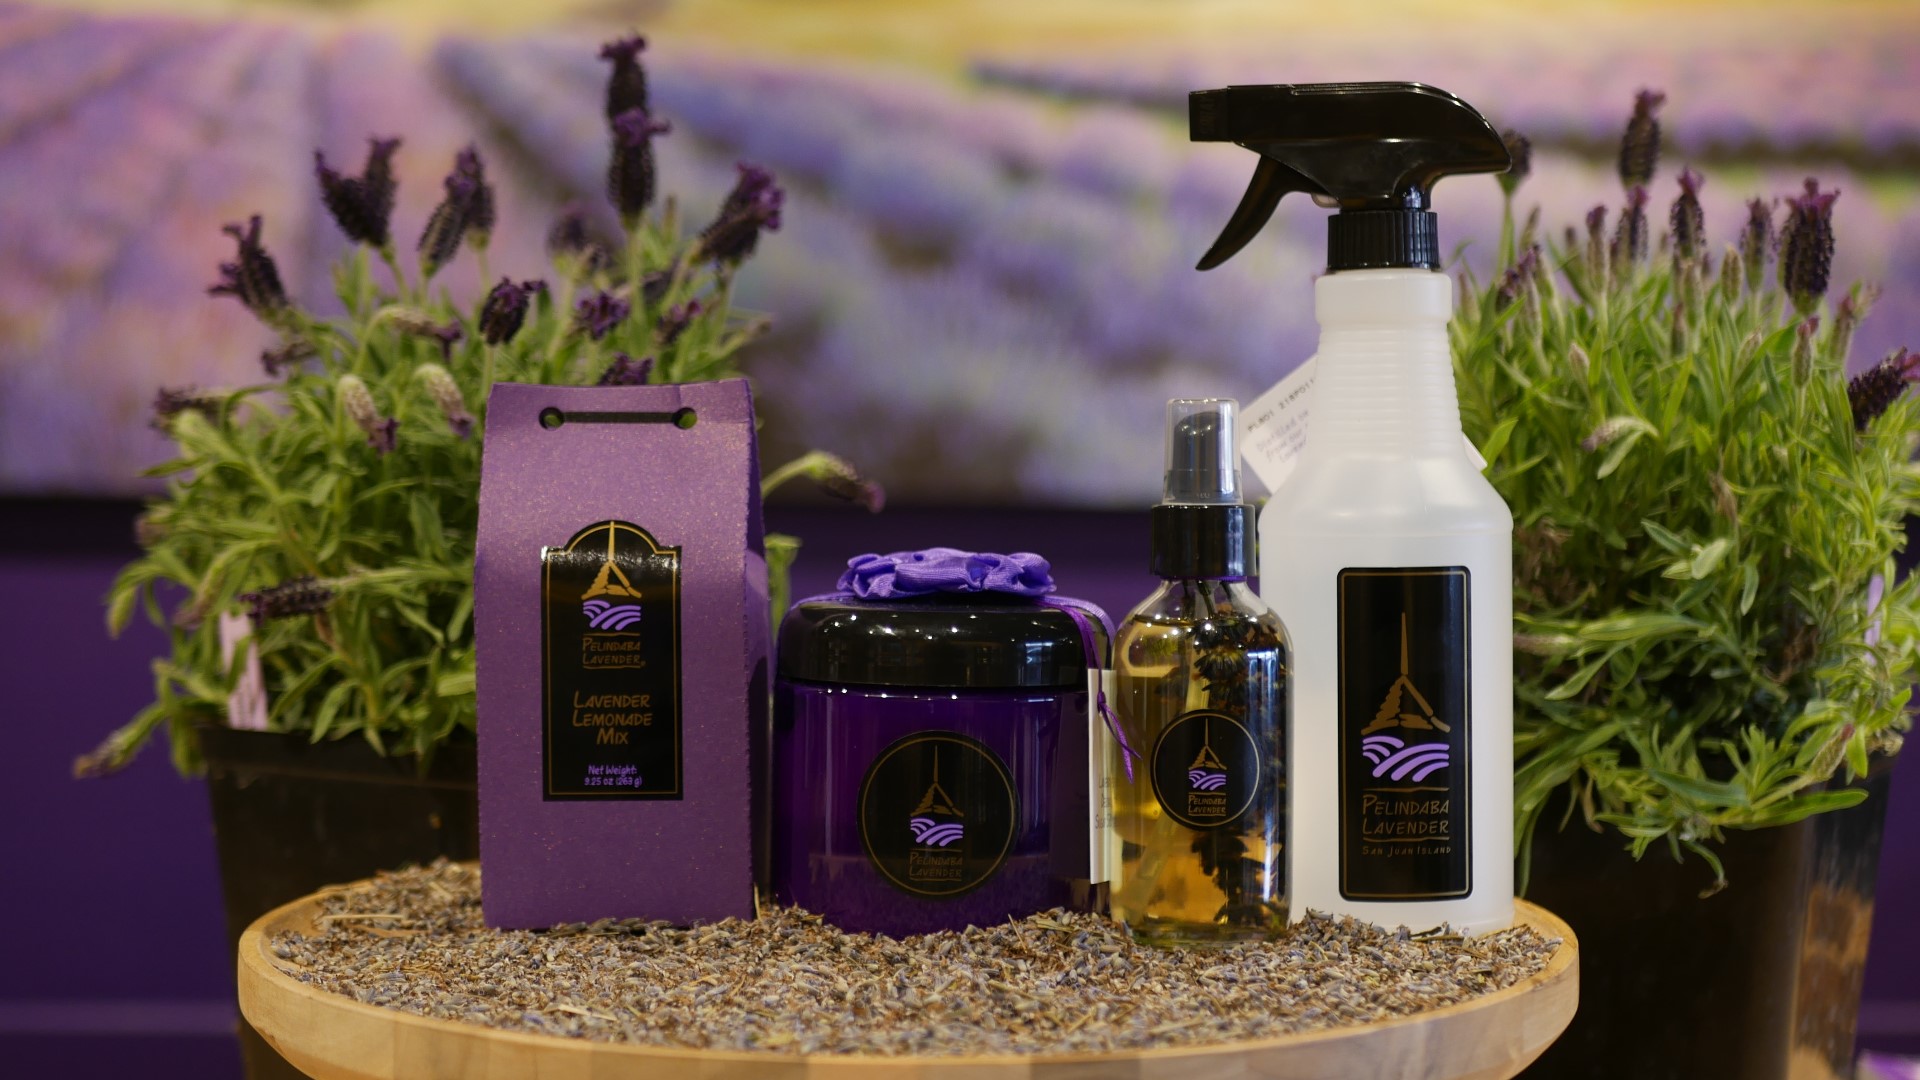 Pelindaba Lavender in Edmonds shows us four perfect gifts for Mother's Day! Sponsored by Pelindaba Lavender.